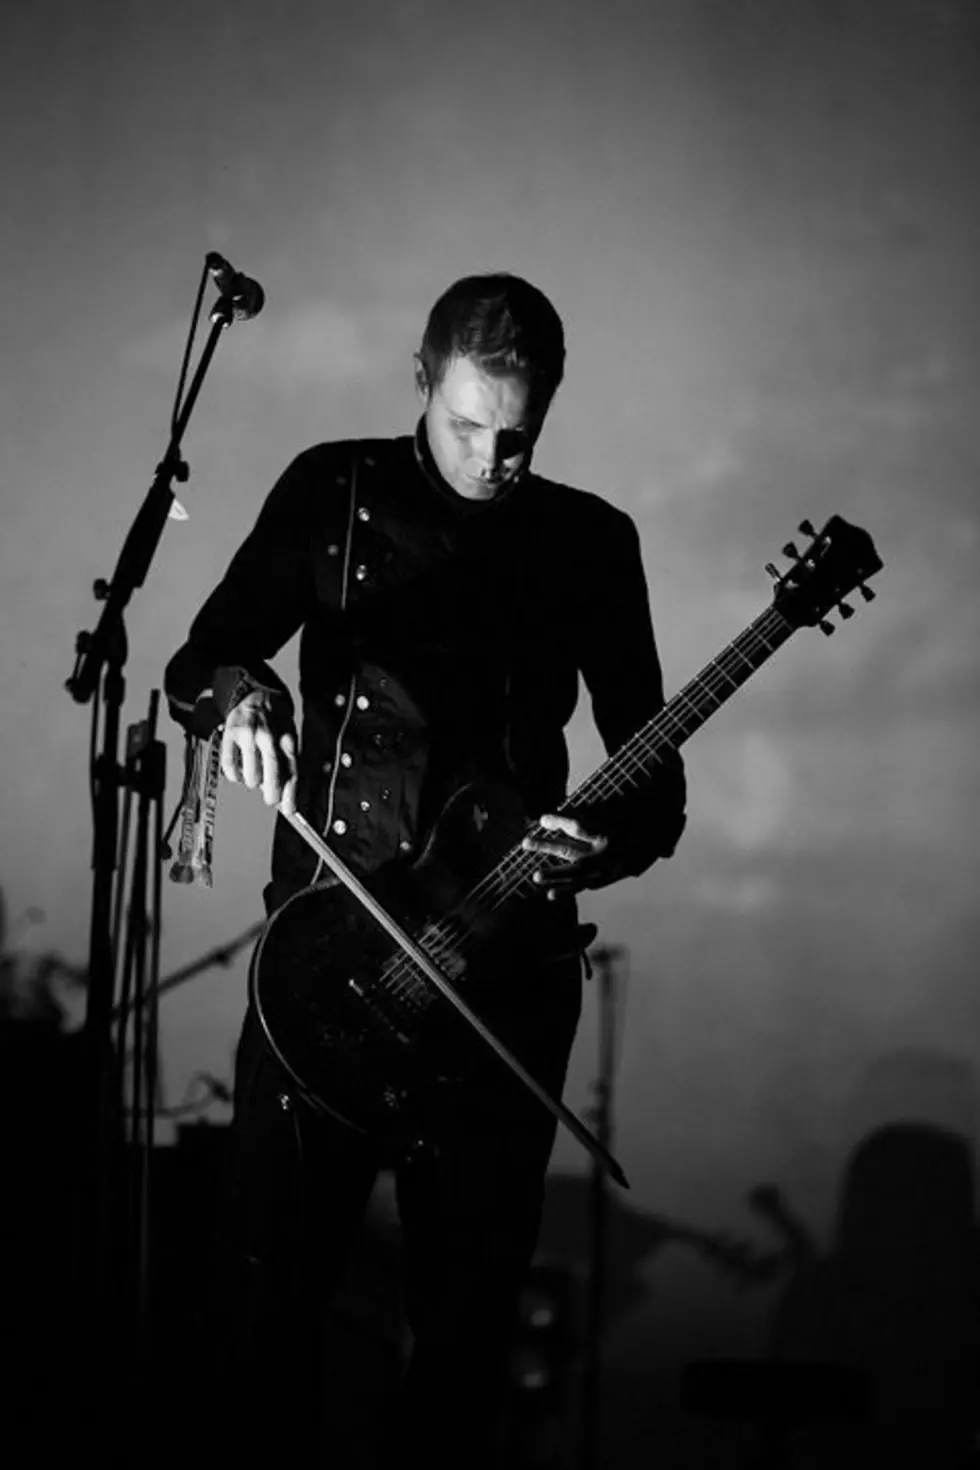 Sigur Ros touring North America in 2013, playing UIC Pavilion